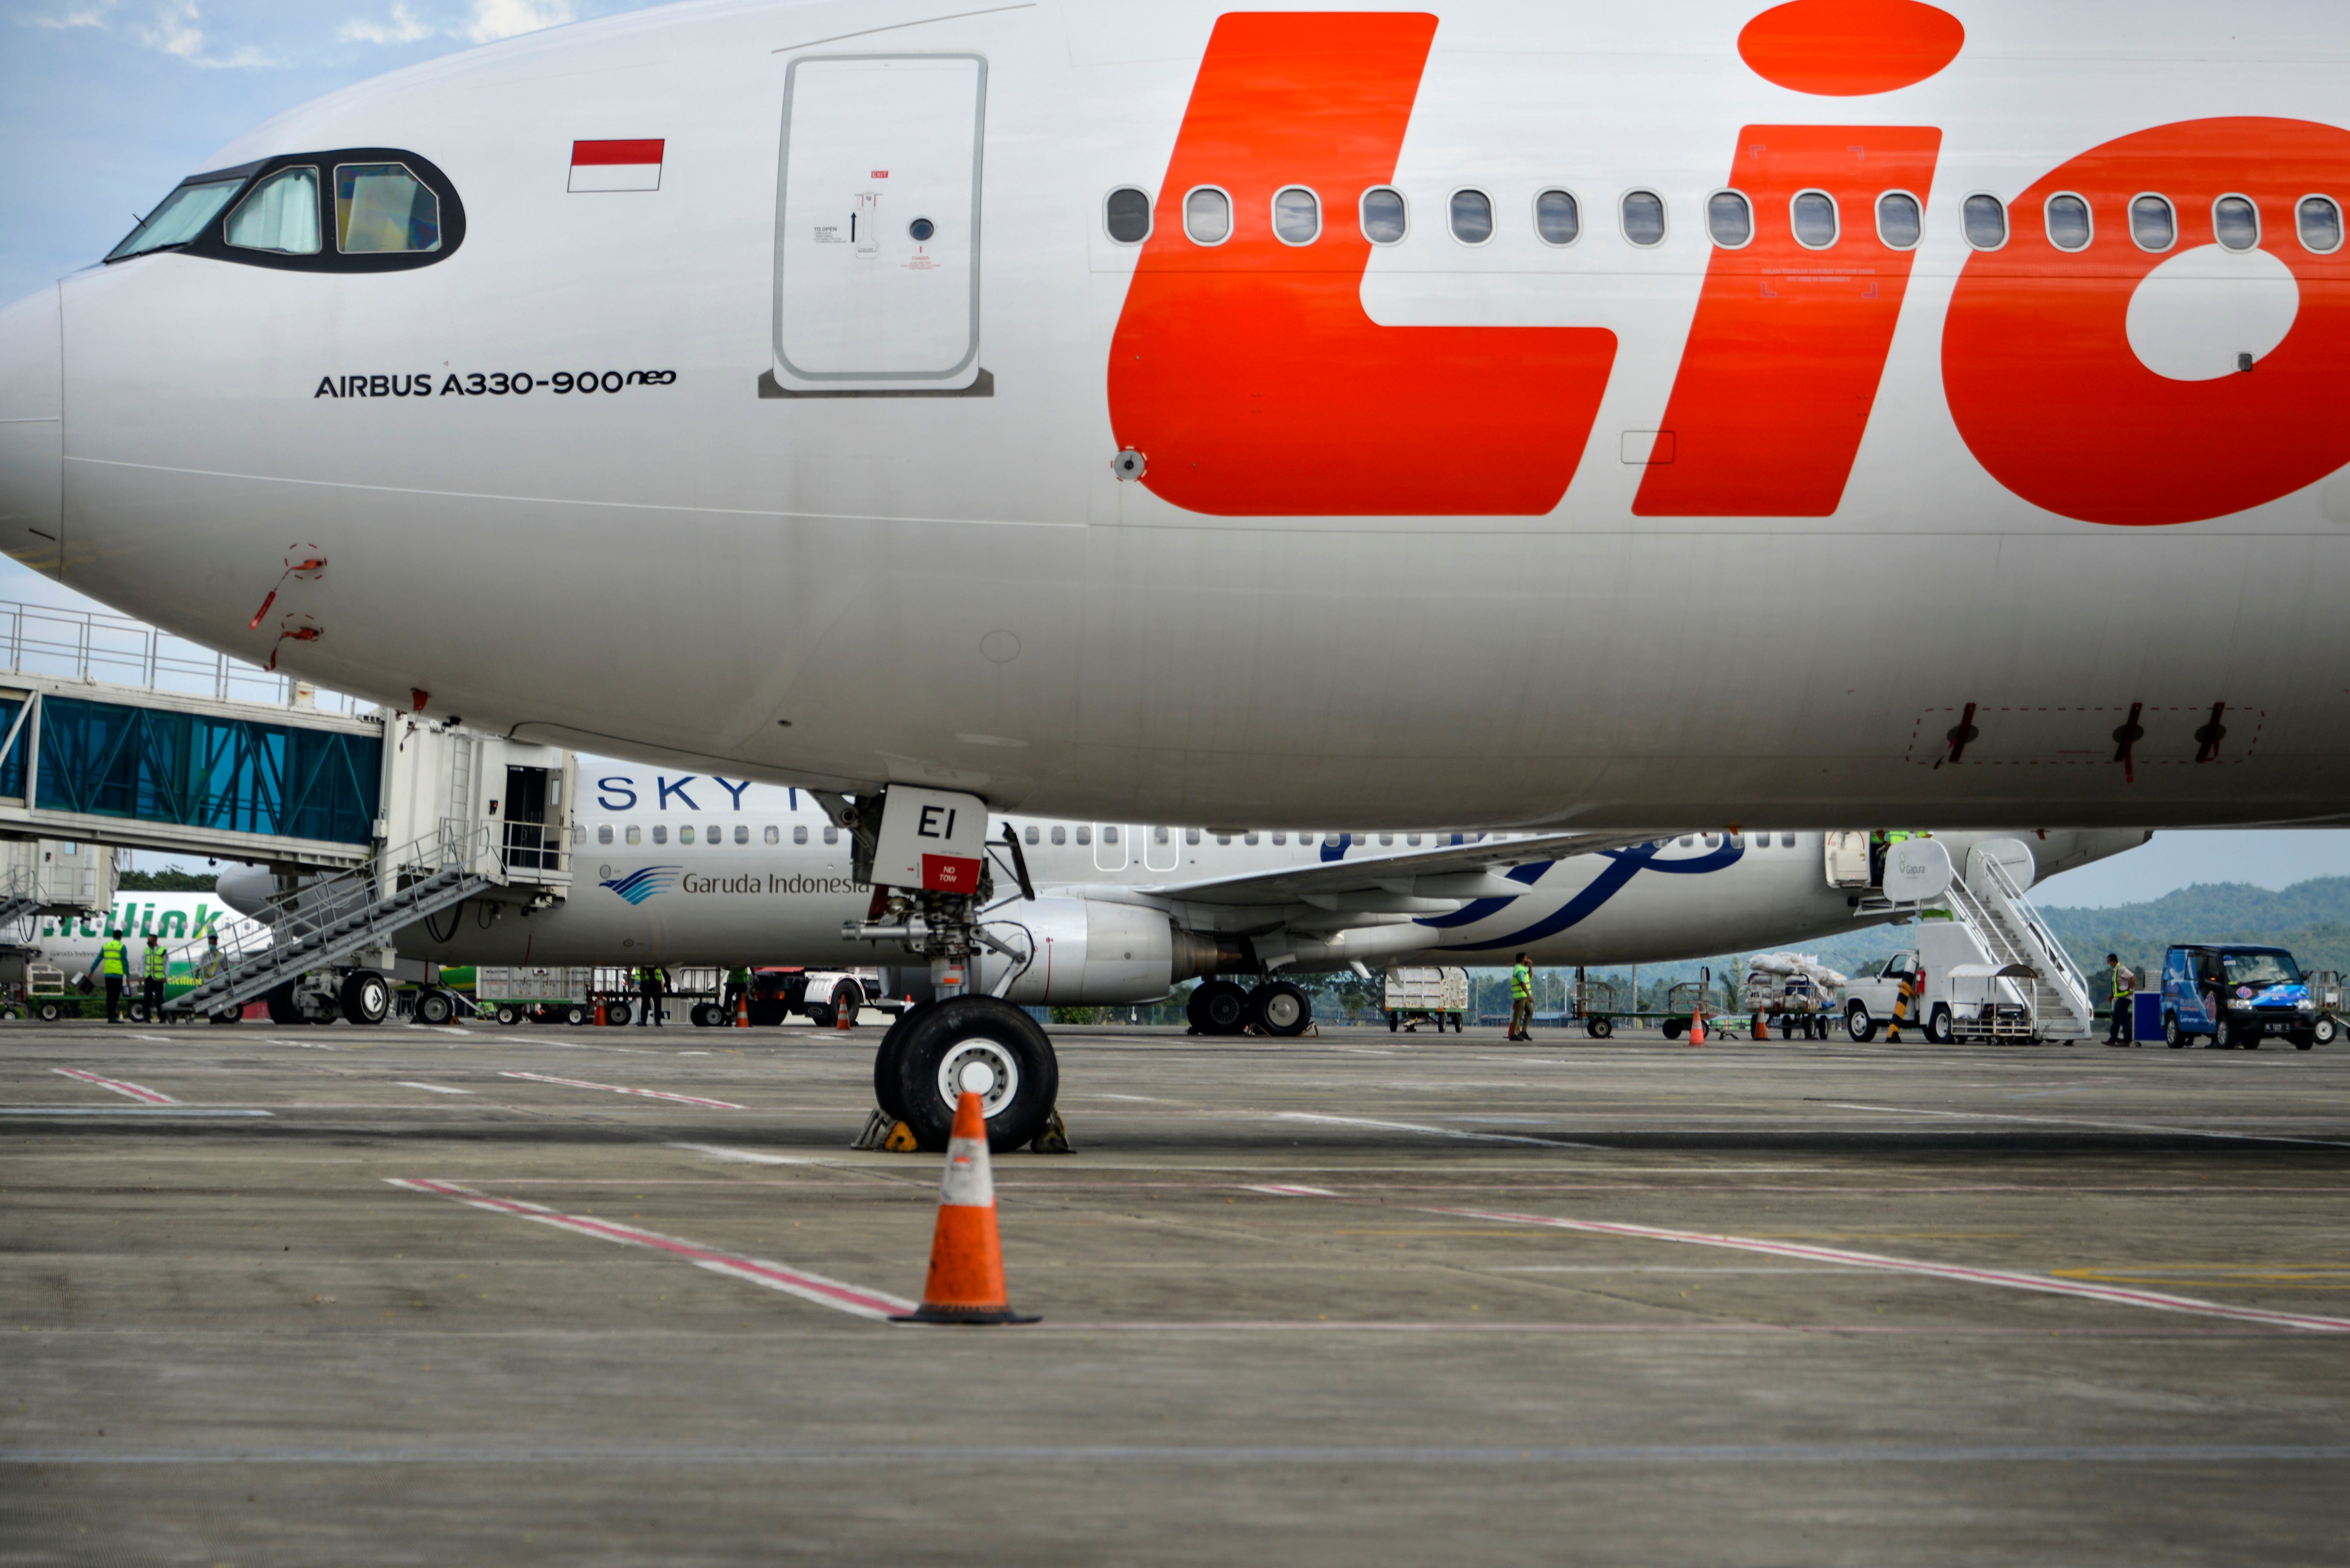 Helmud Hontong was onboard a Lion Air flight when he was taken ill